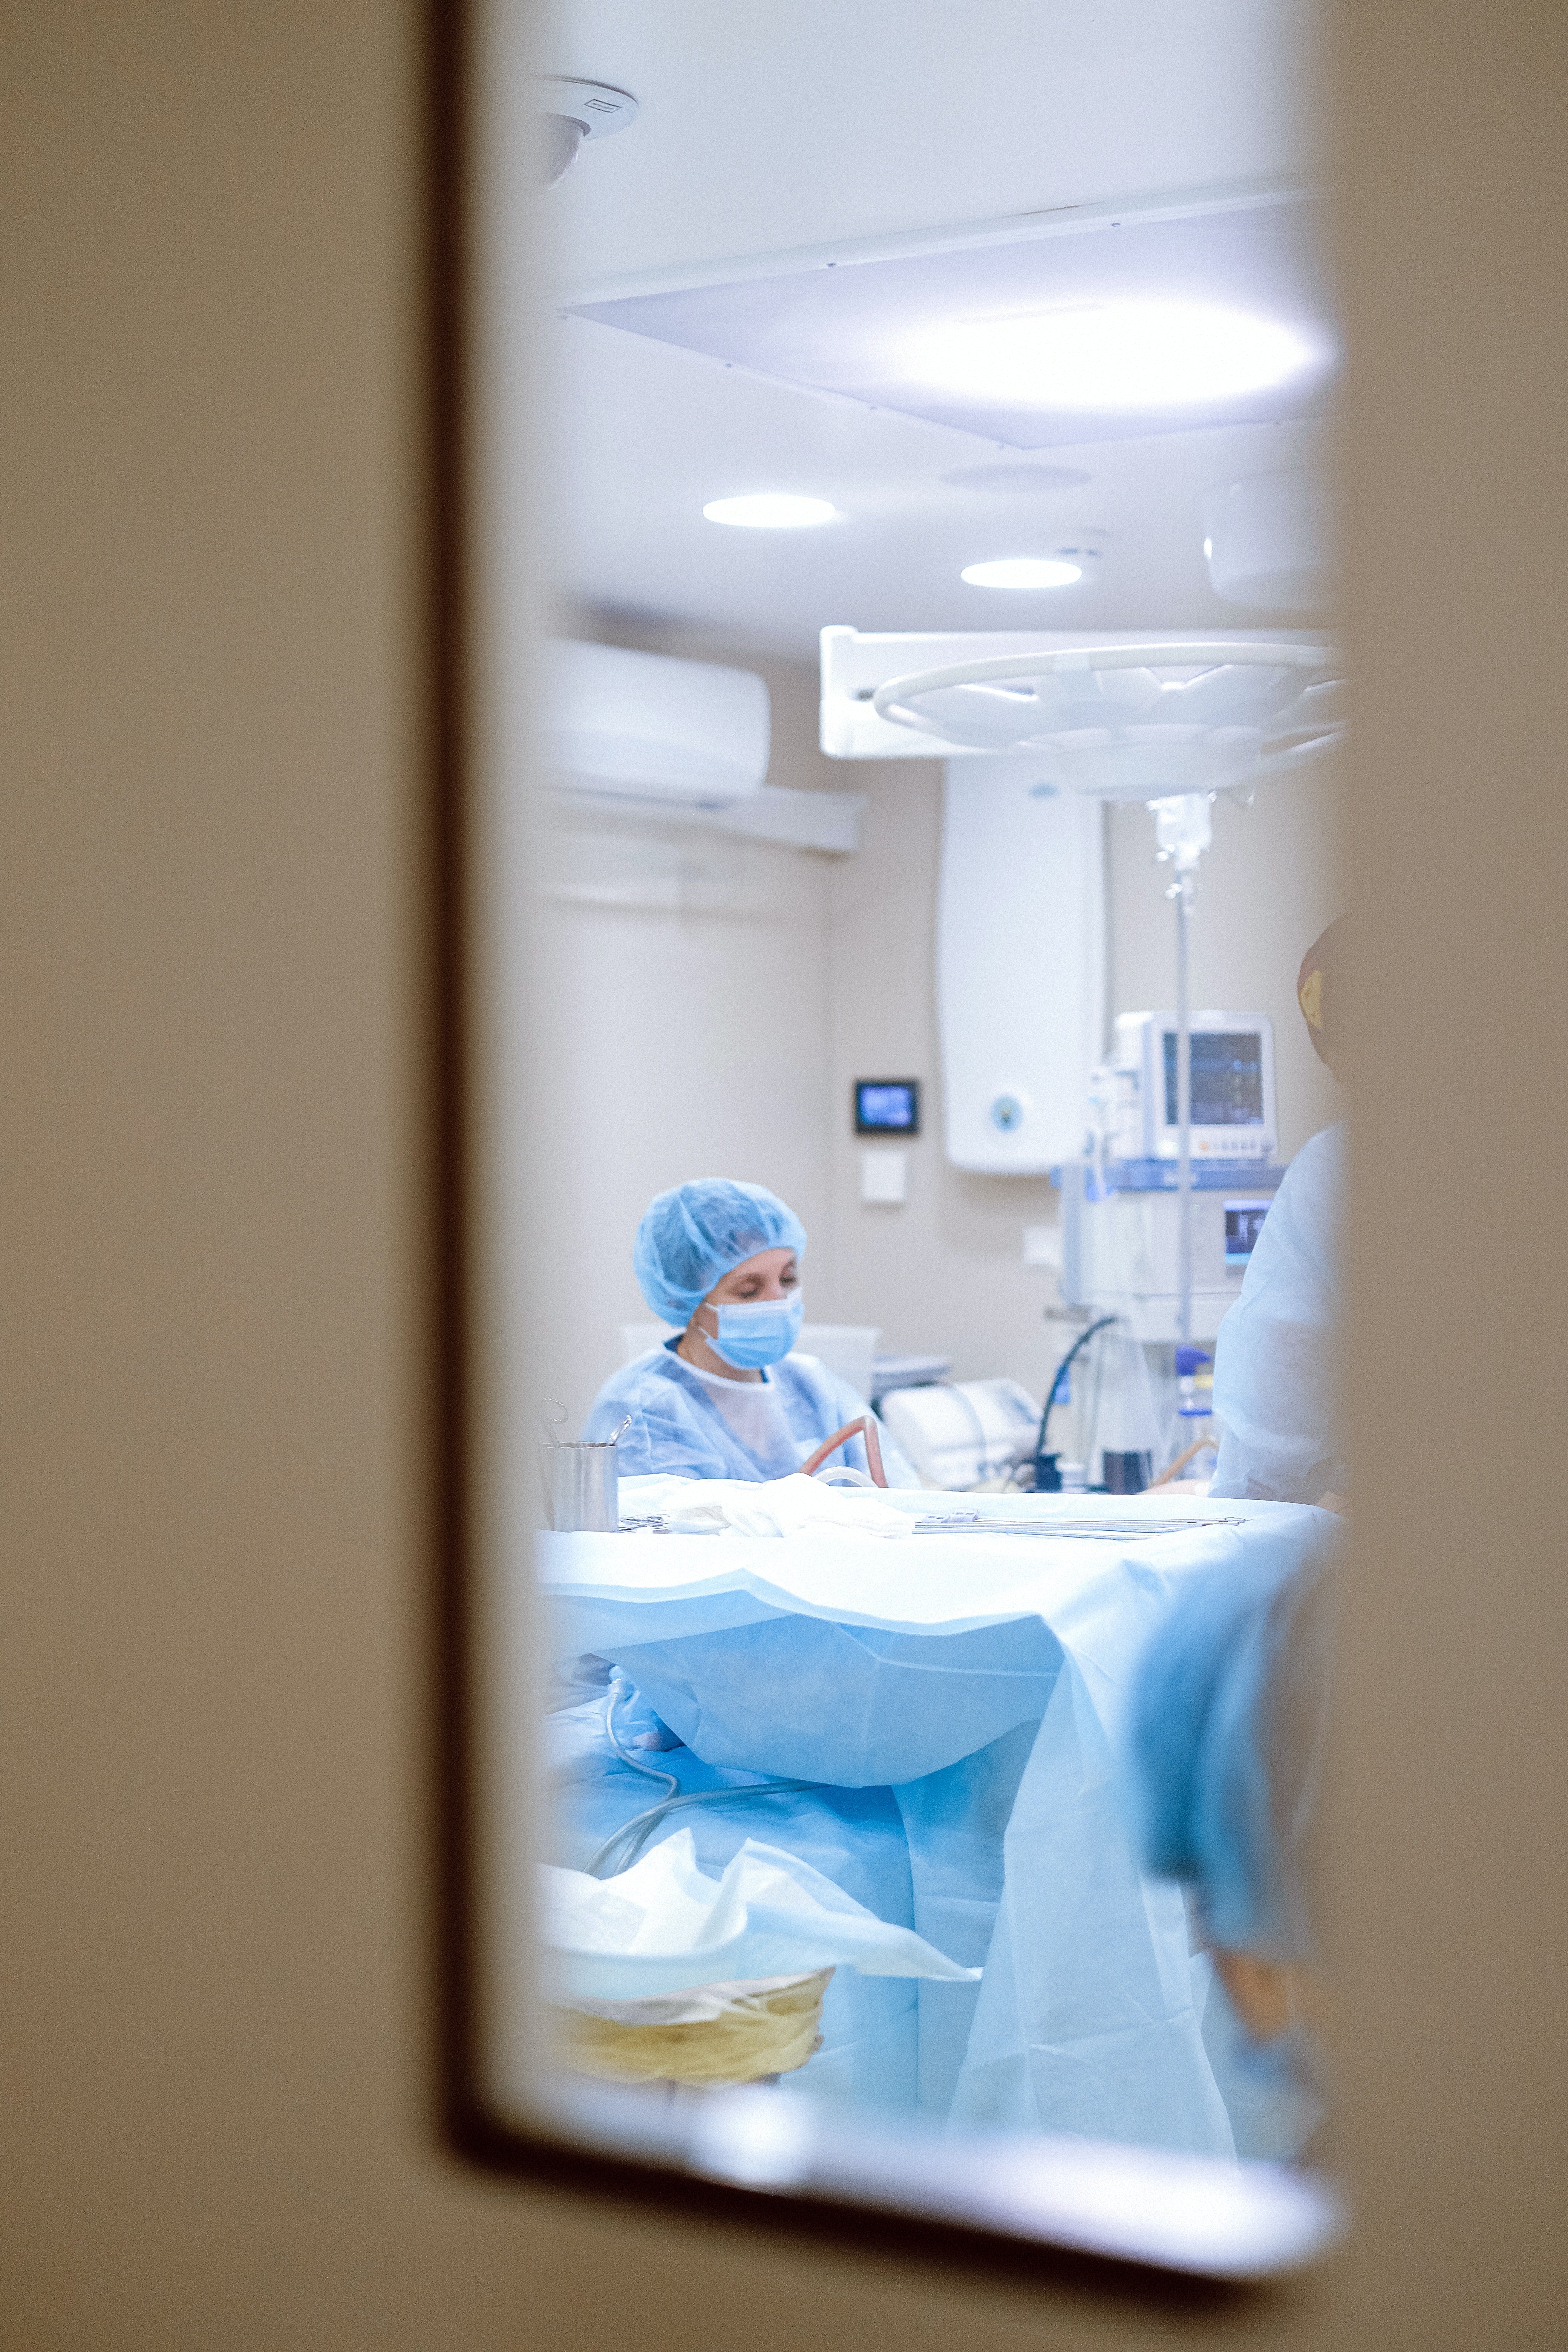 Pictured - An image of a healthcare professional inside the operating room | Source: Pexels 